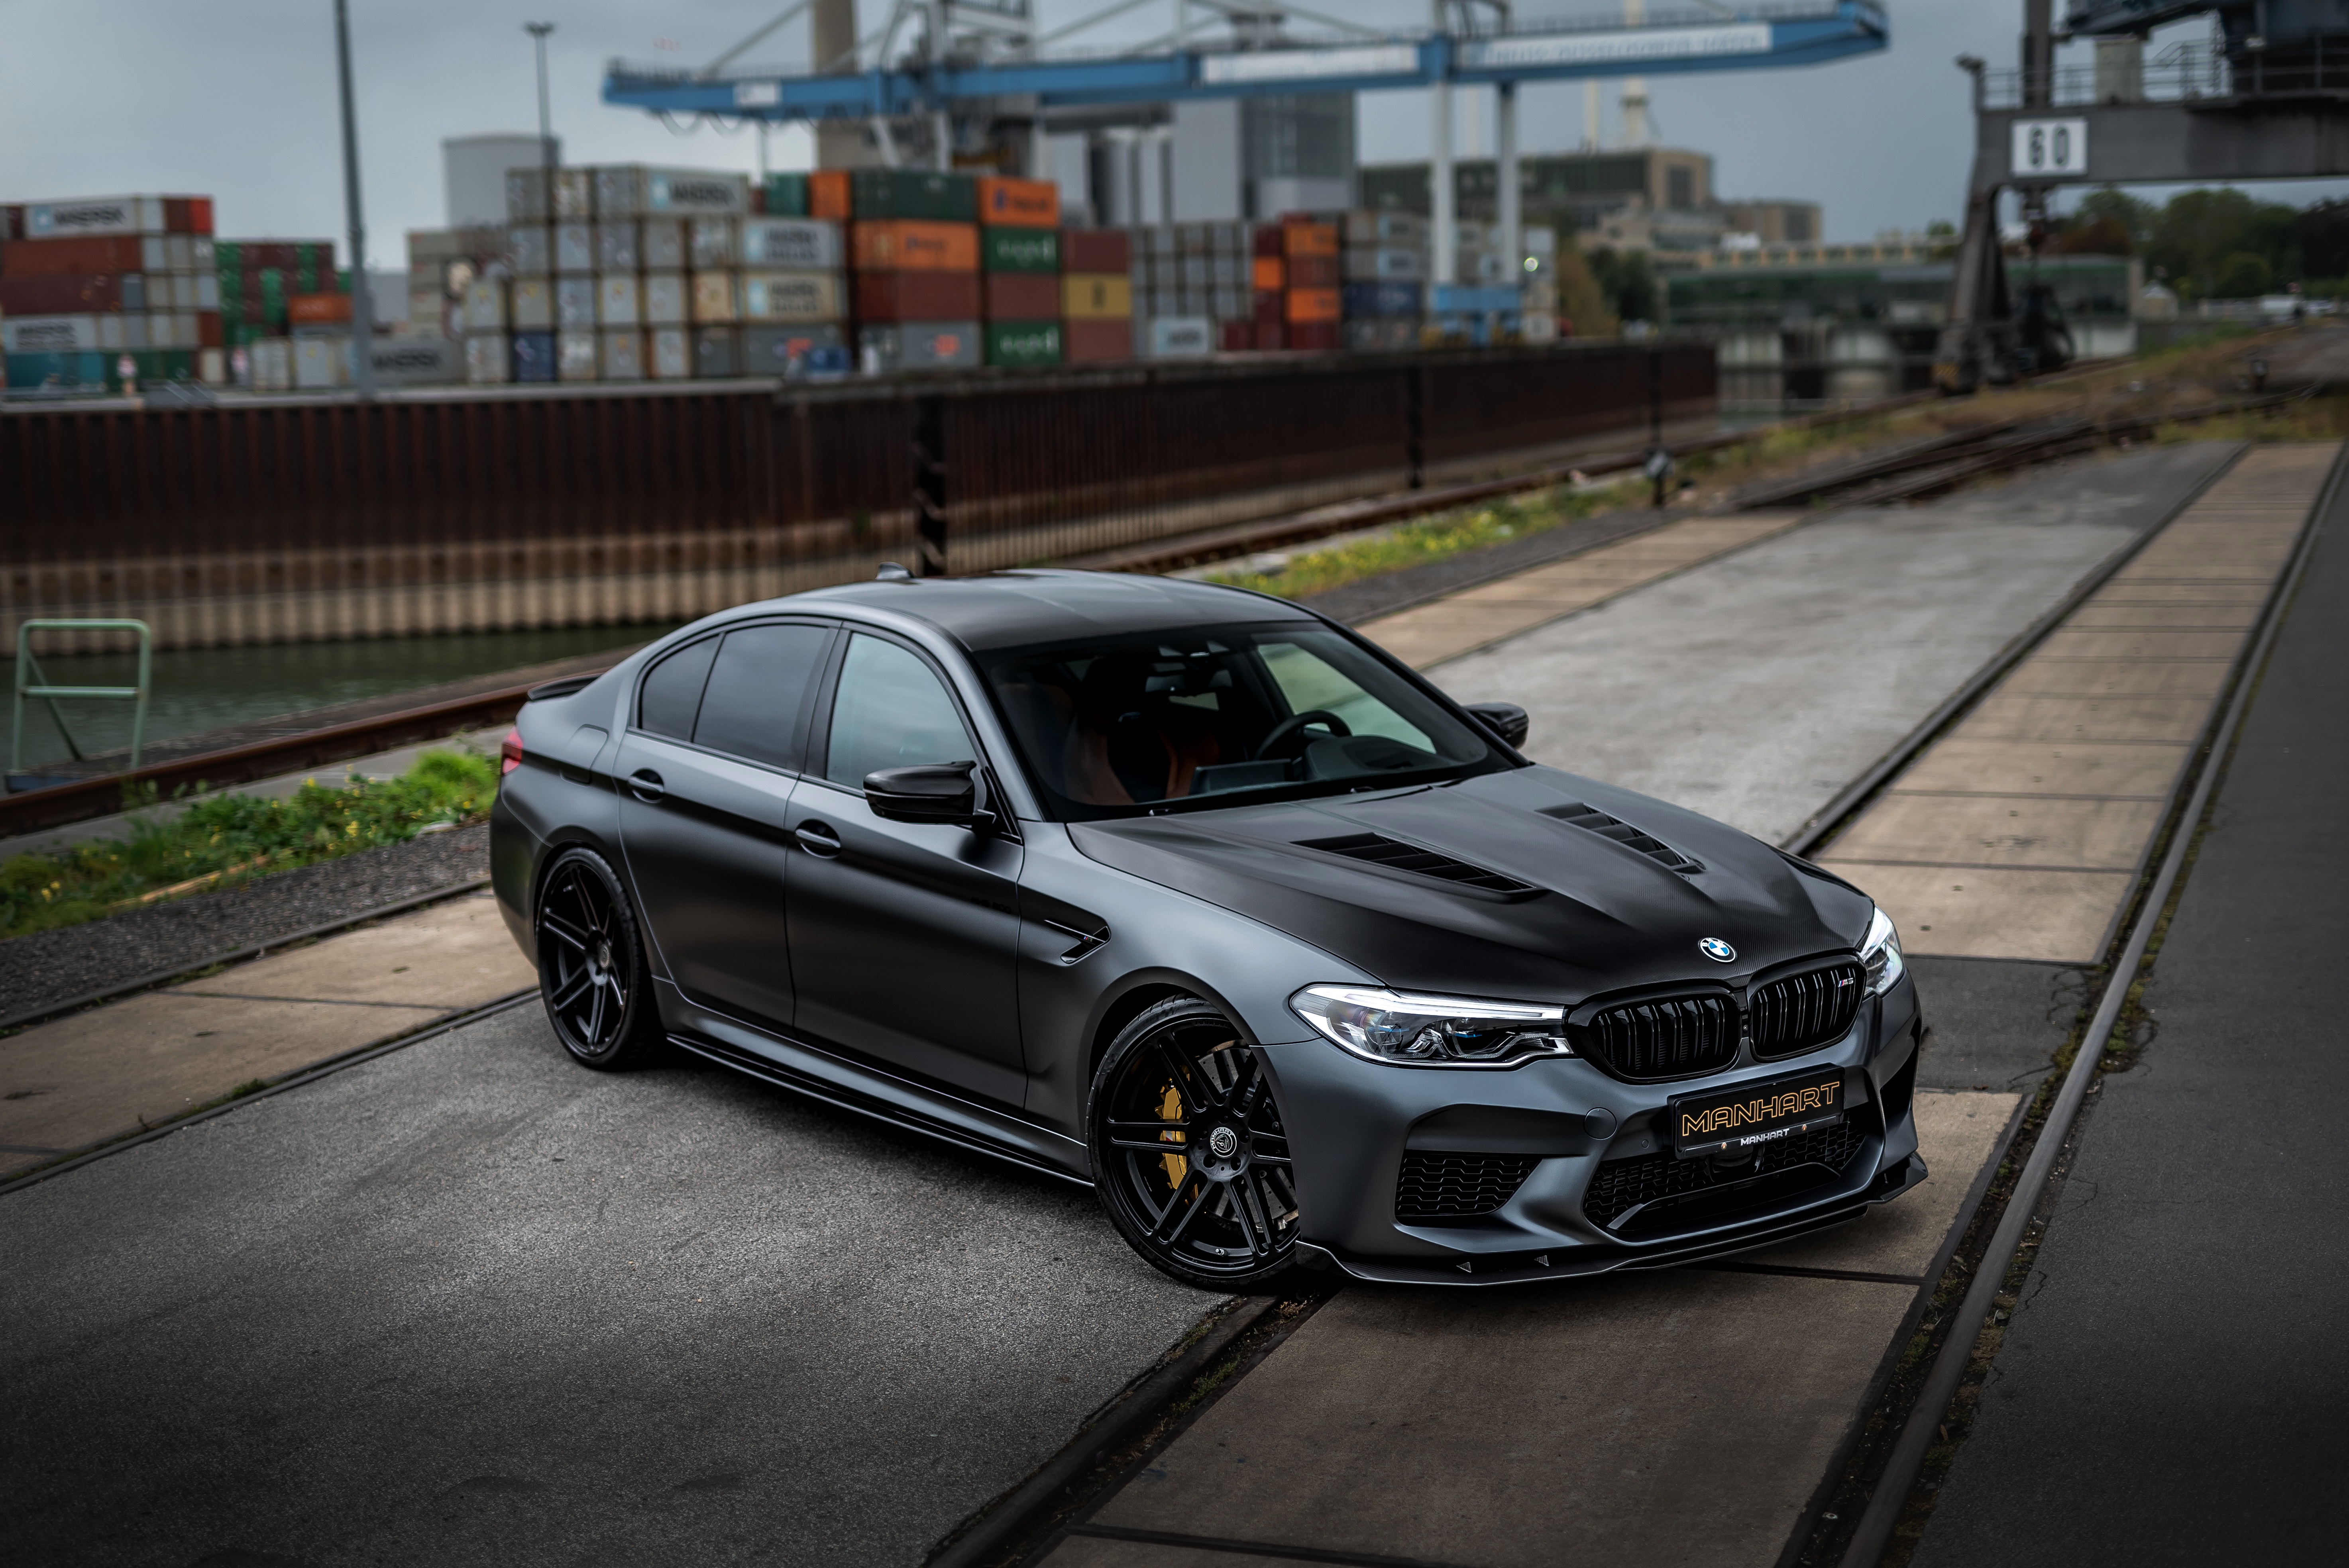 Bmw M5 Pictures  Download Free Images on Unsplash